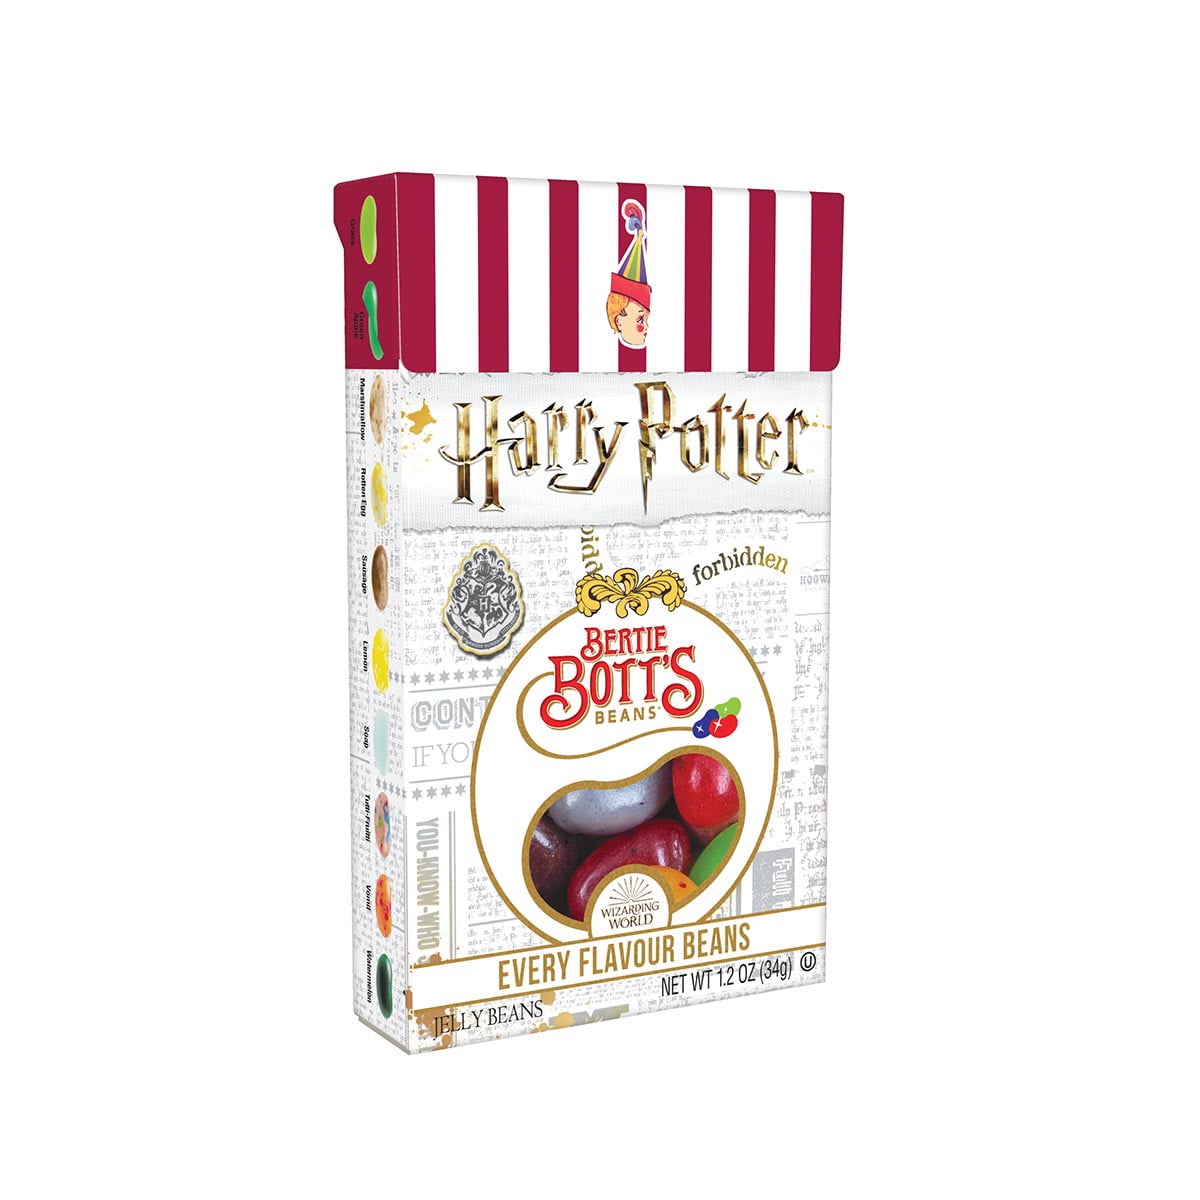 Bertie Bott's every flavor jelly beans from Harry Potter